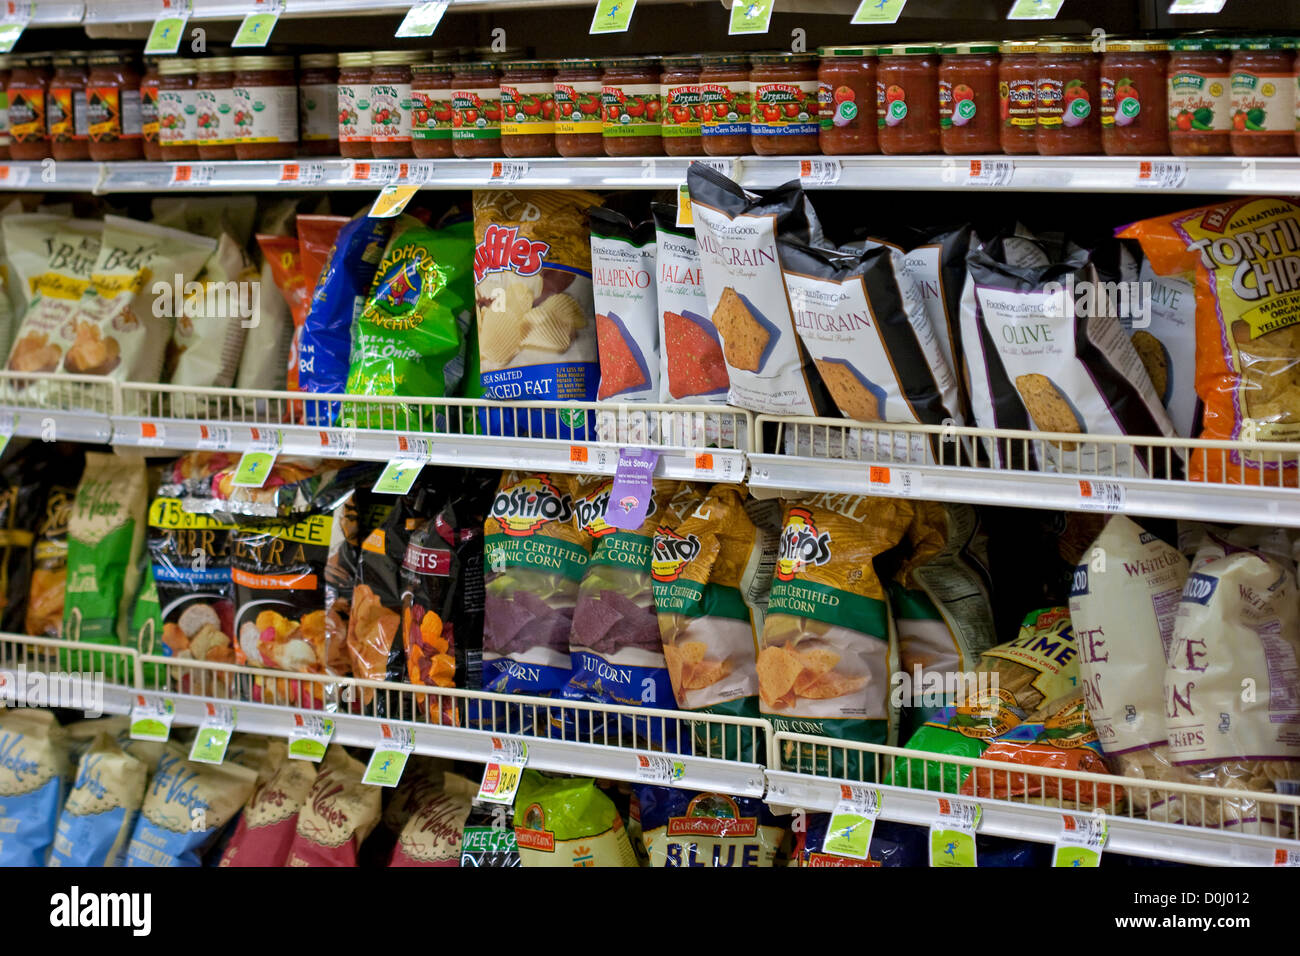 Snack Food Products On Grocery Store Shelves Stock Photo 52026270 Alamy